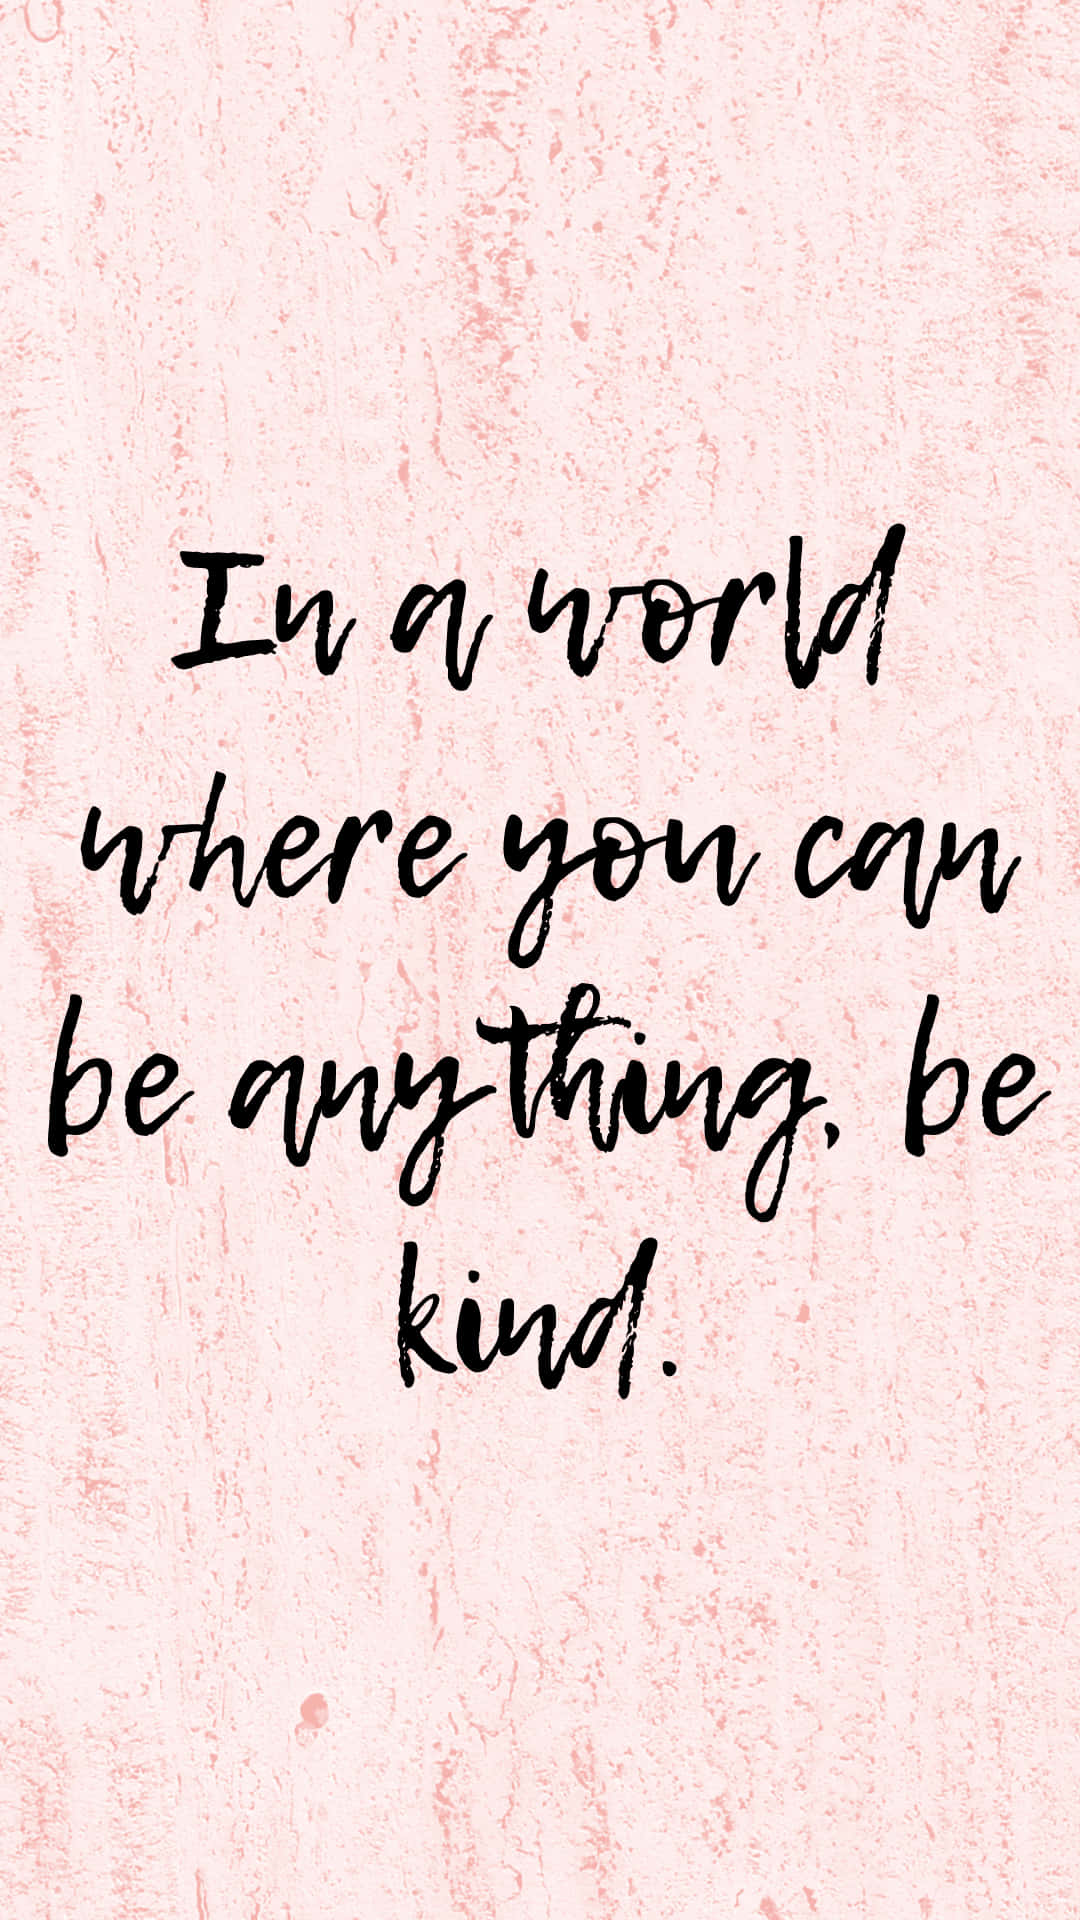 Be Kind Calligraphy Quote Wallpaper